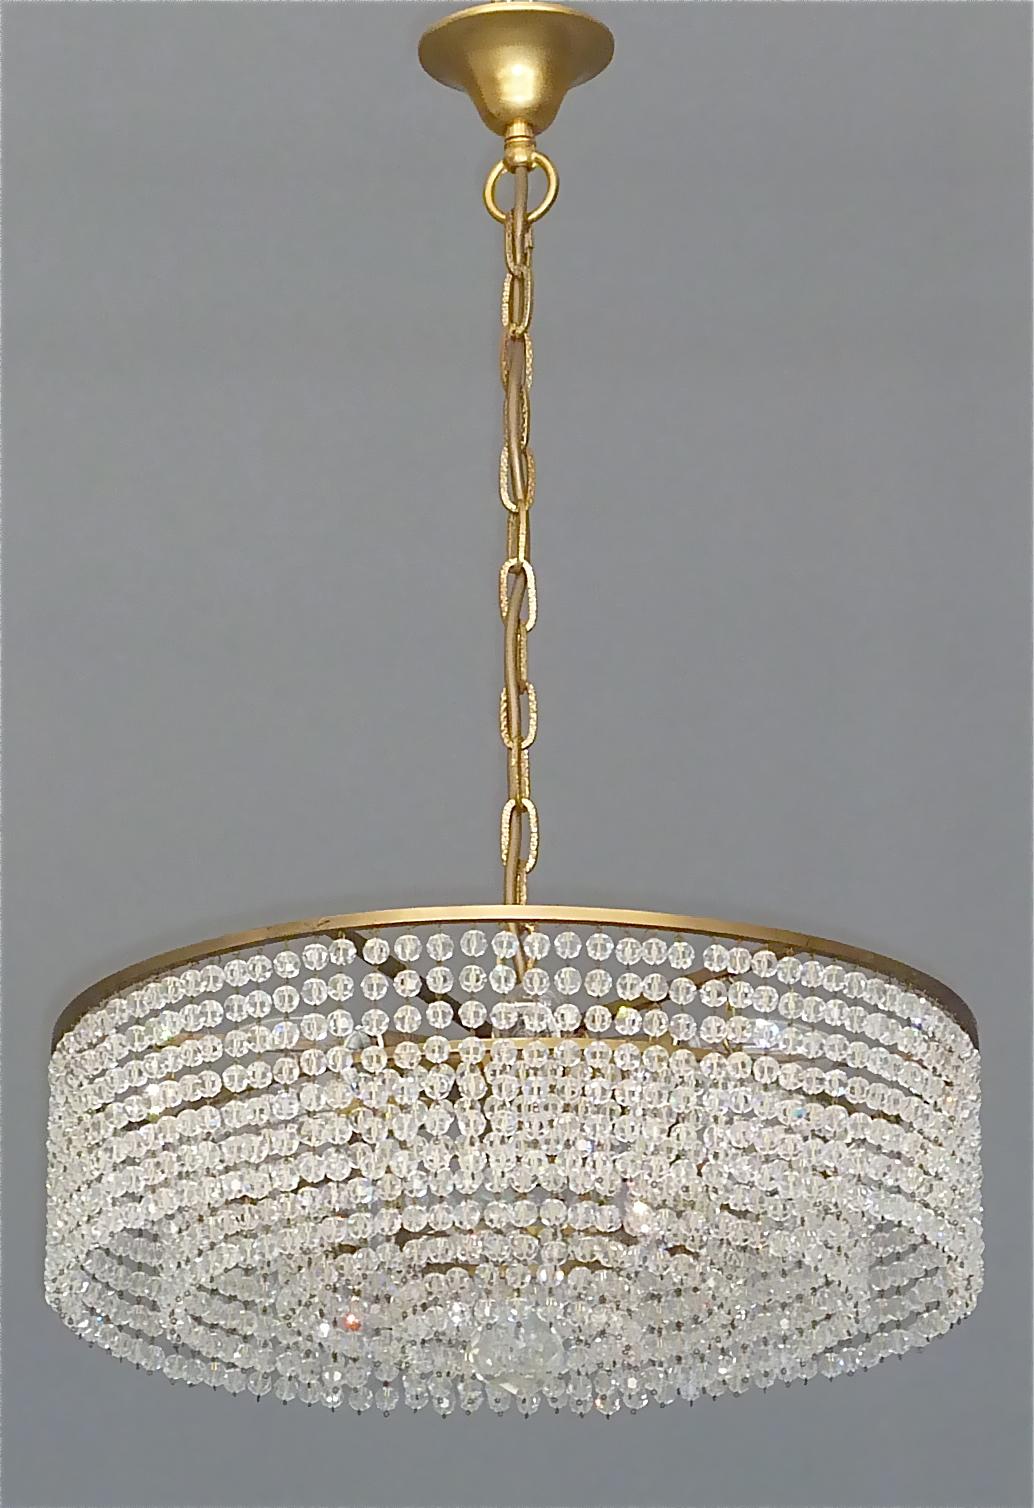 Lobmeyr Crystal Glass String Chandelier Patinated Brass Austria 1950s, No.2 of 2 For Sale 9